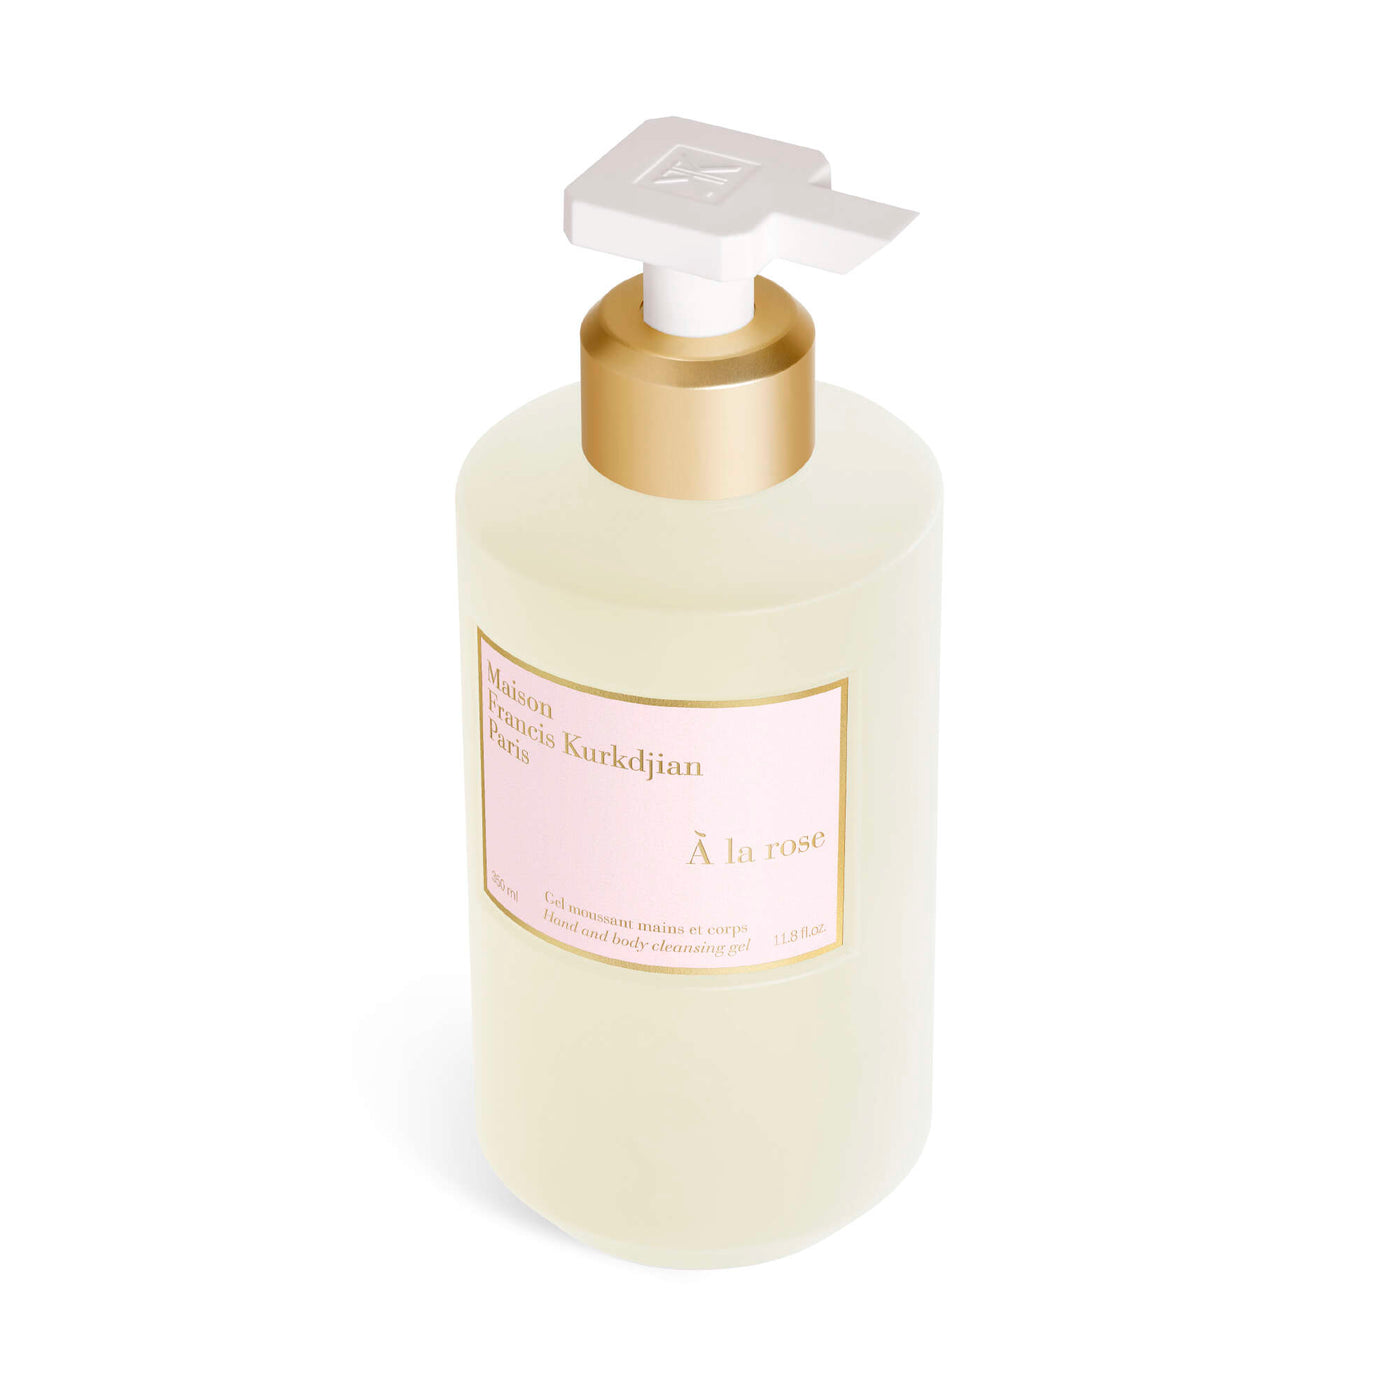 À la rose - Hand and Body Cleansing Gel